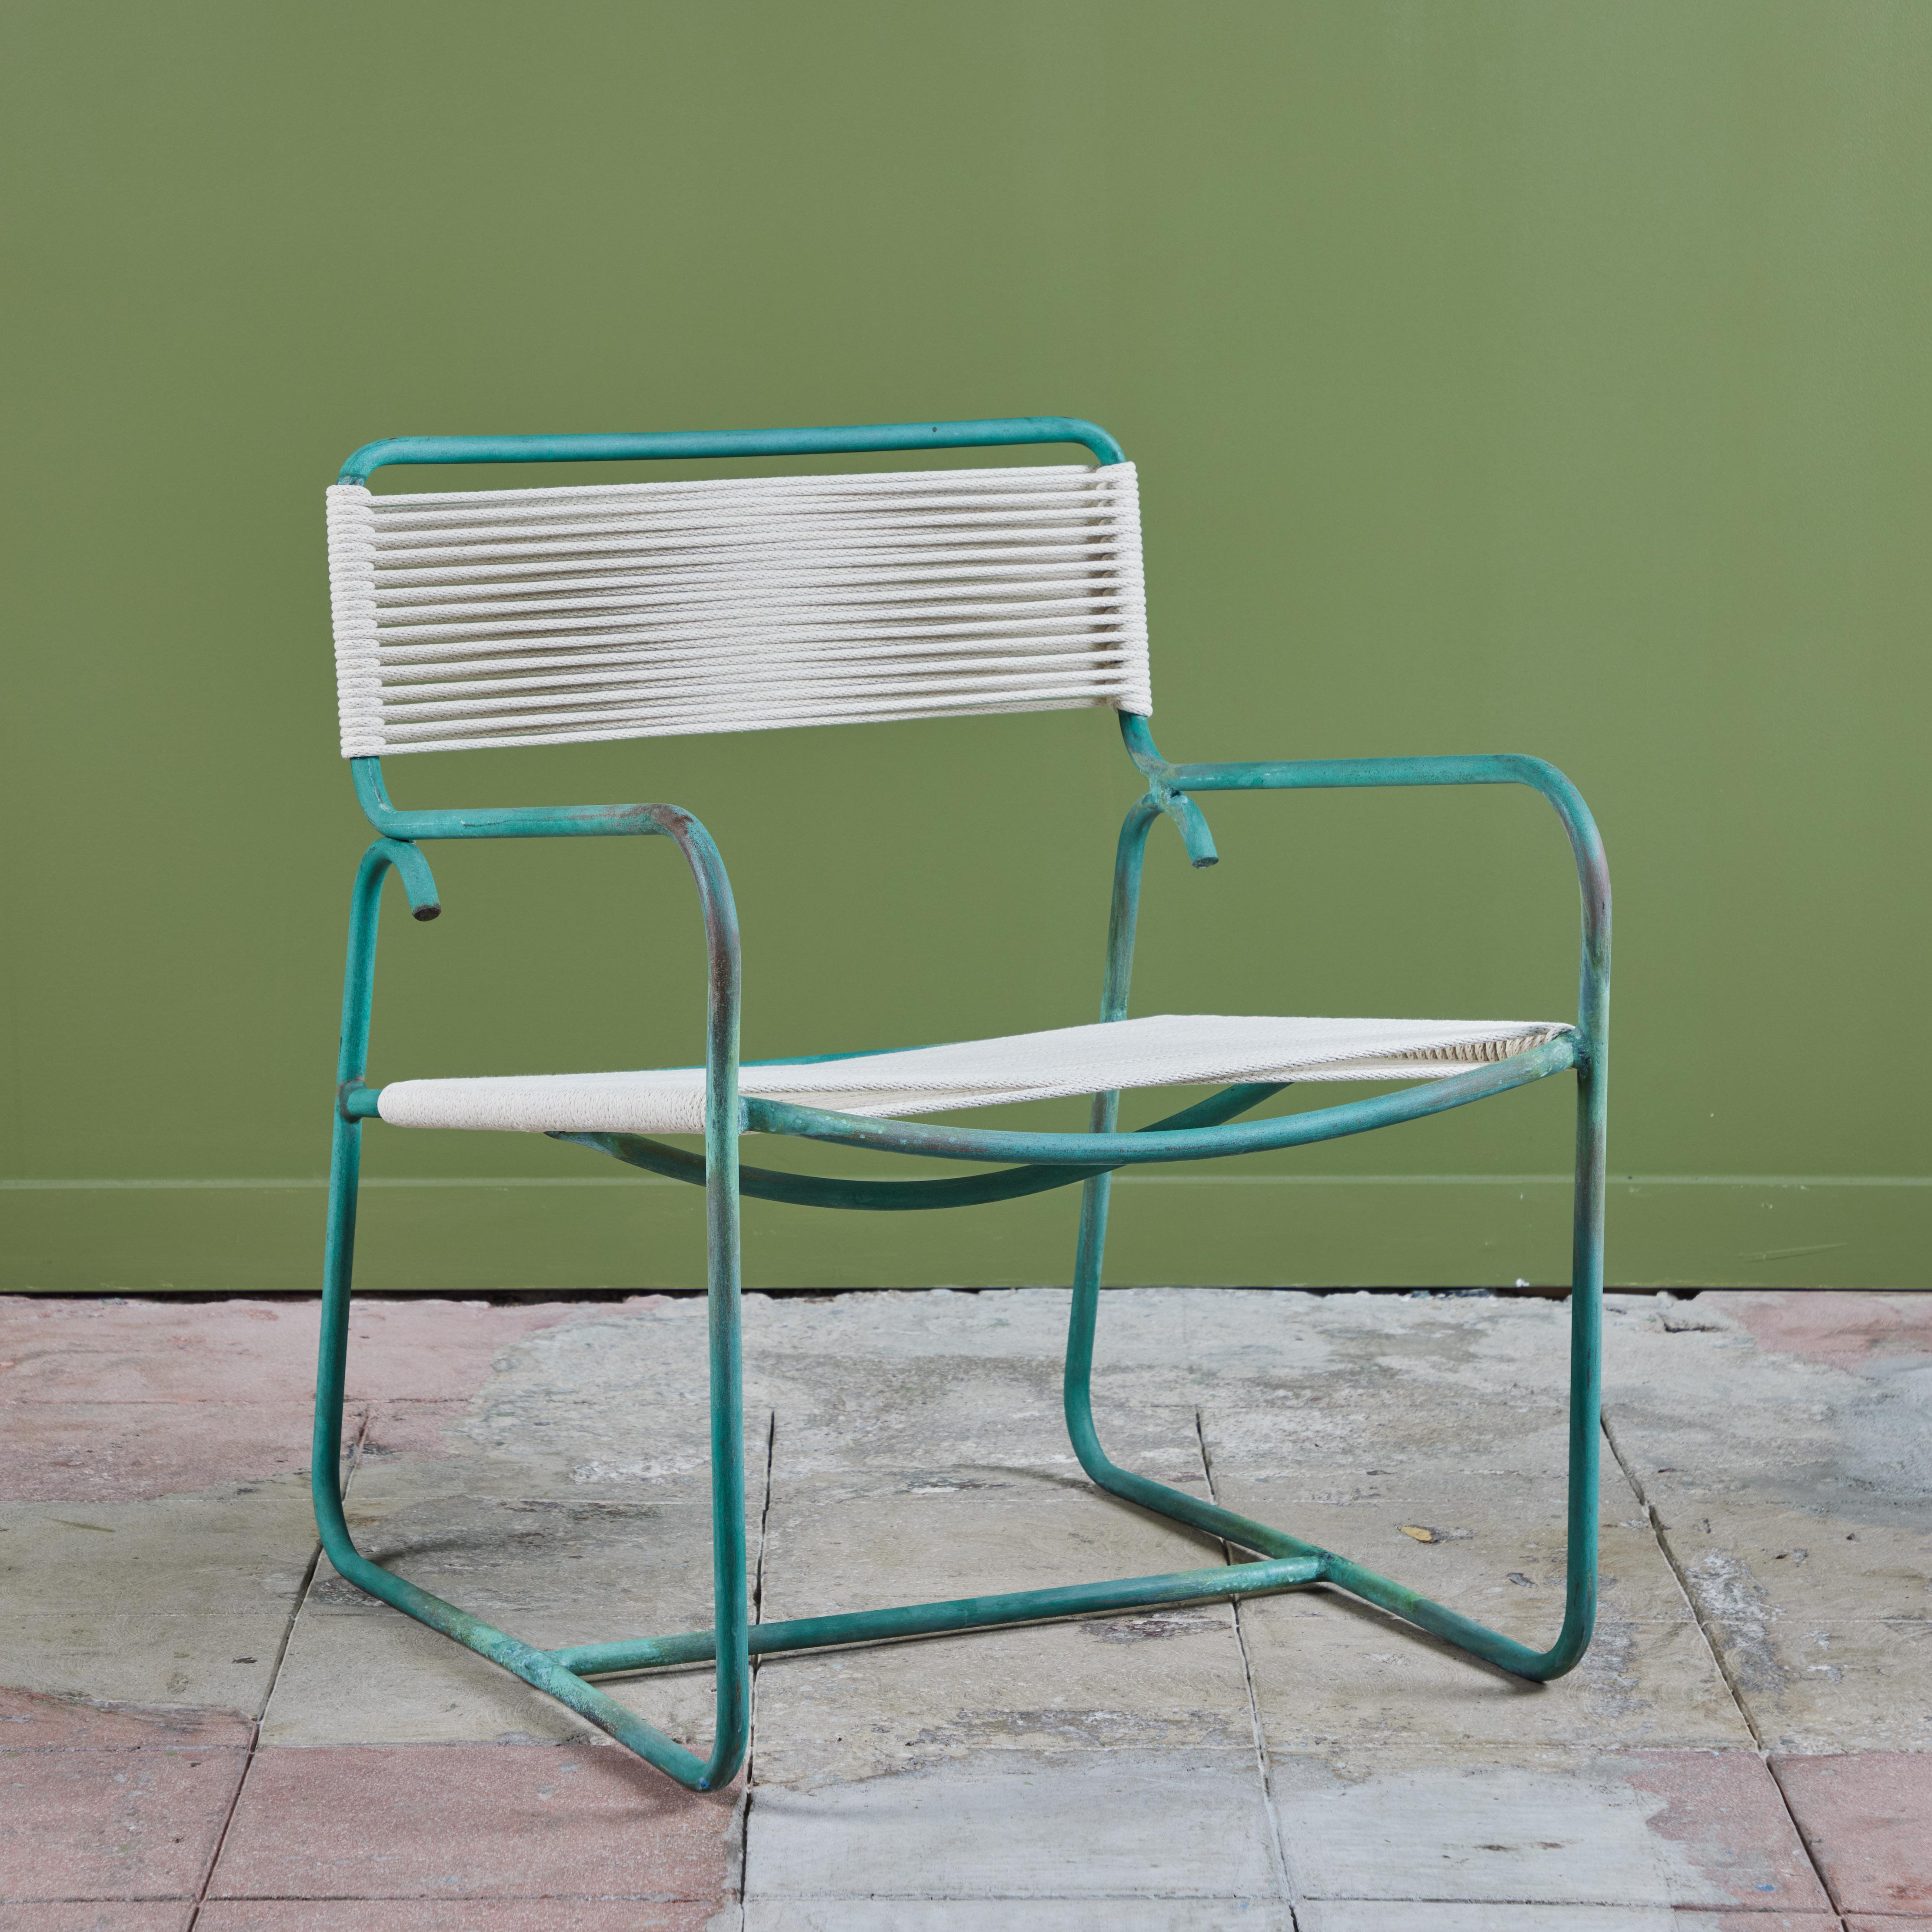 A wide patio lounge chair by Walter Lamb for Brown Jordan. The chair has a simple construction in tubular bronze with a patinated finish, with rounded squares serving as runners on each side. The backrest, and seat are both woven in cotton sail